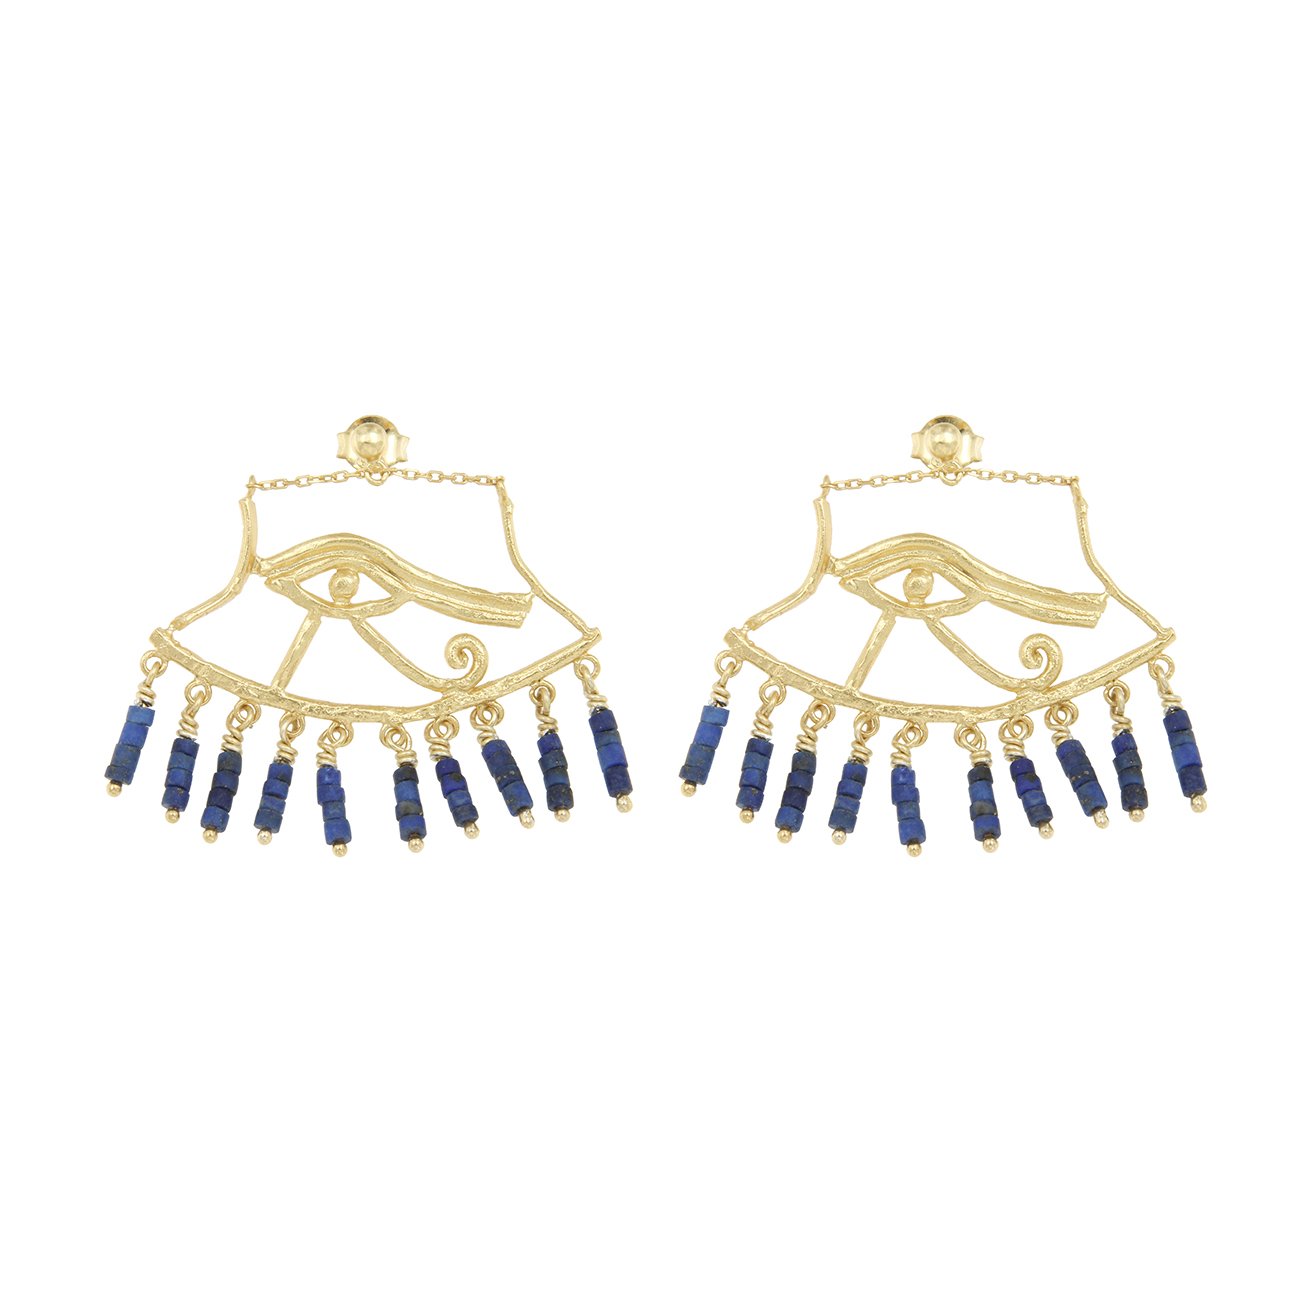 Wedjat Earrings with Lapis Lazuli - 18K Gold Plated